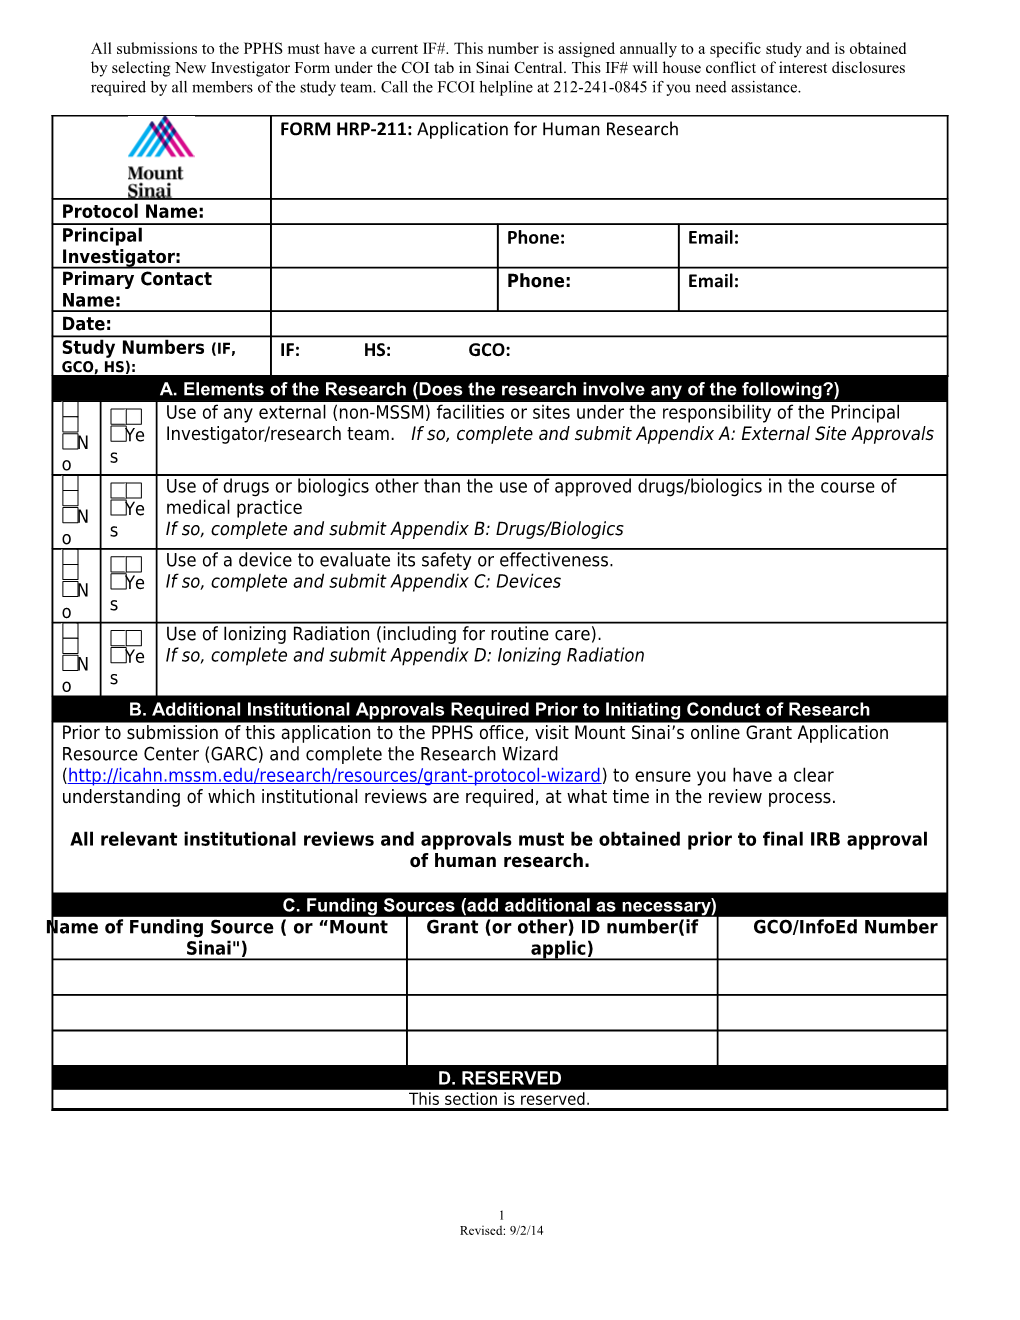 FORM HRP-211: Application for Human Research, Including As Applicable